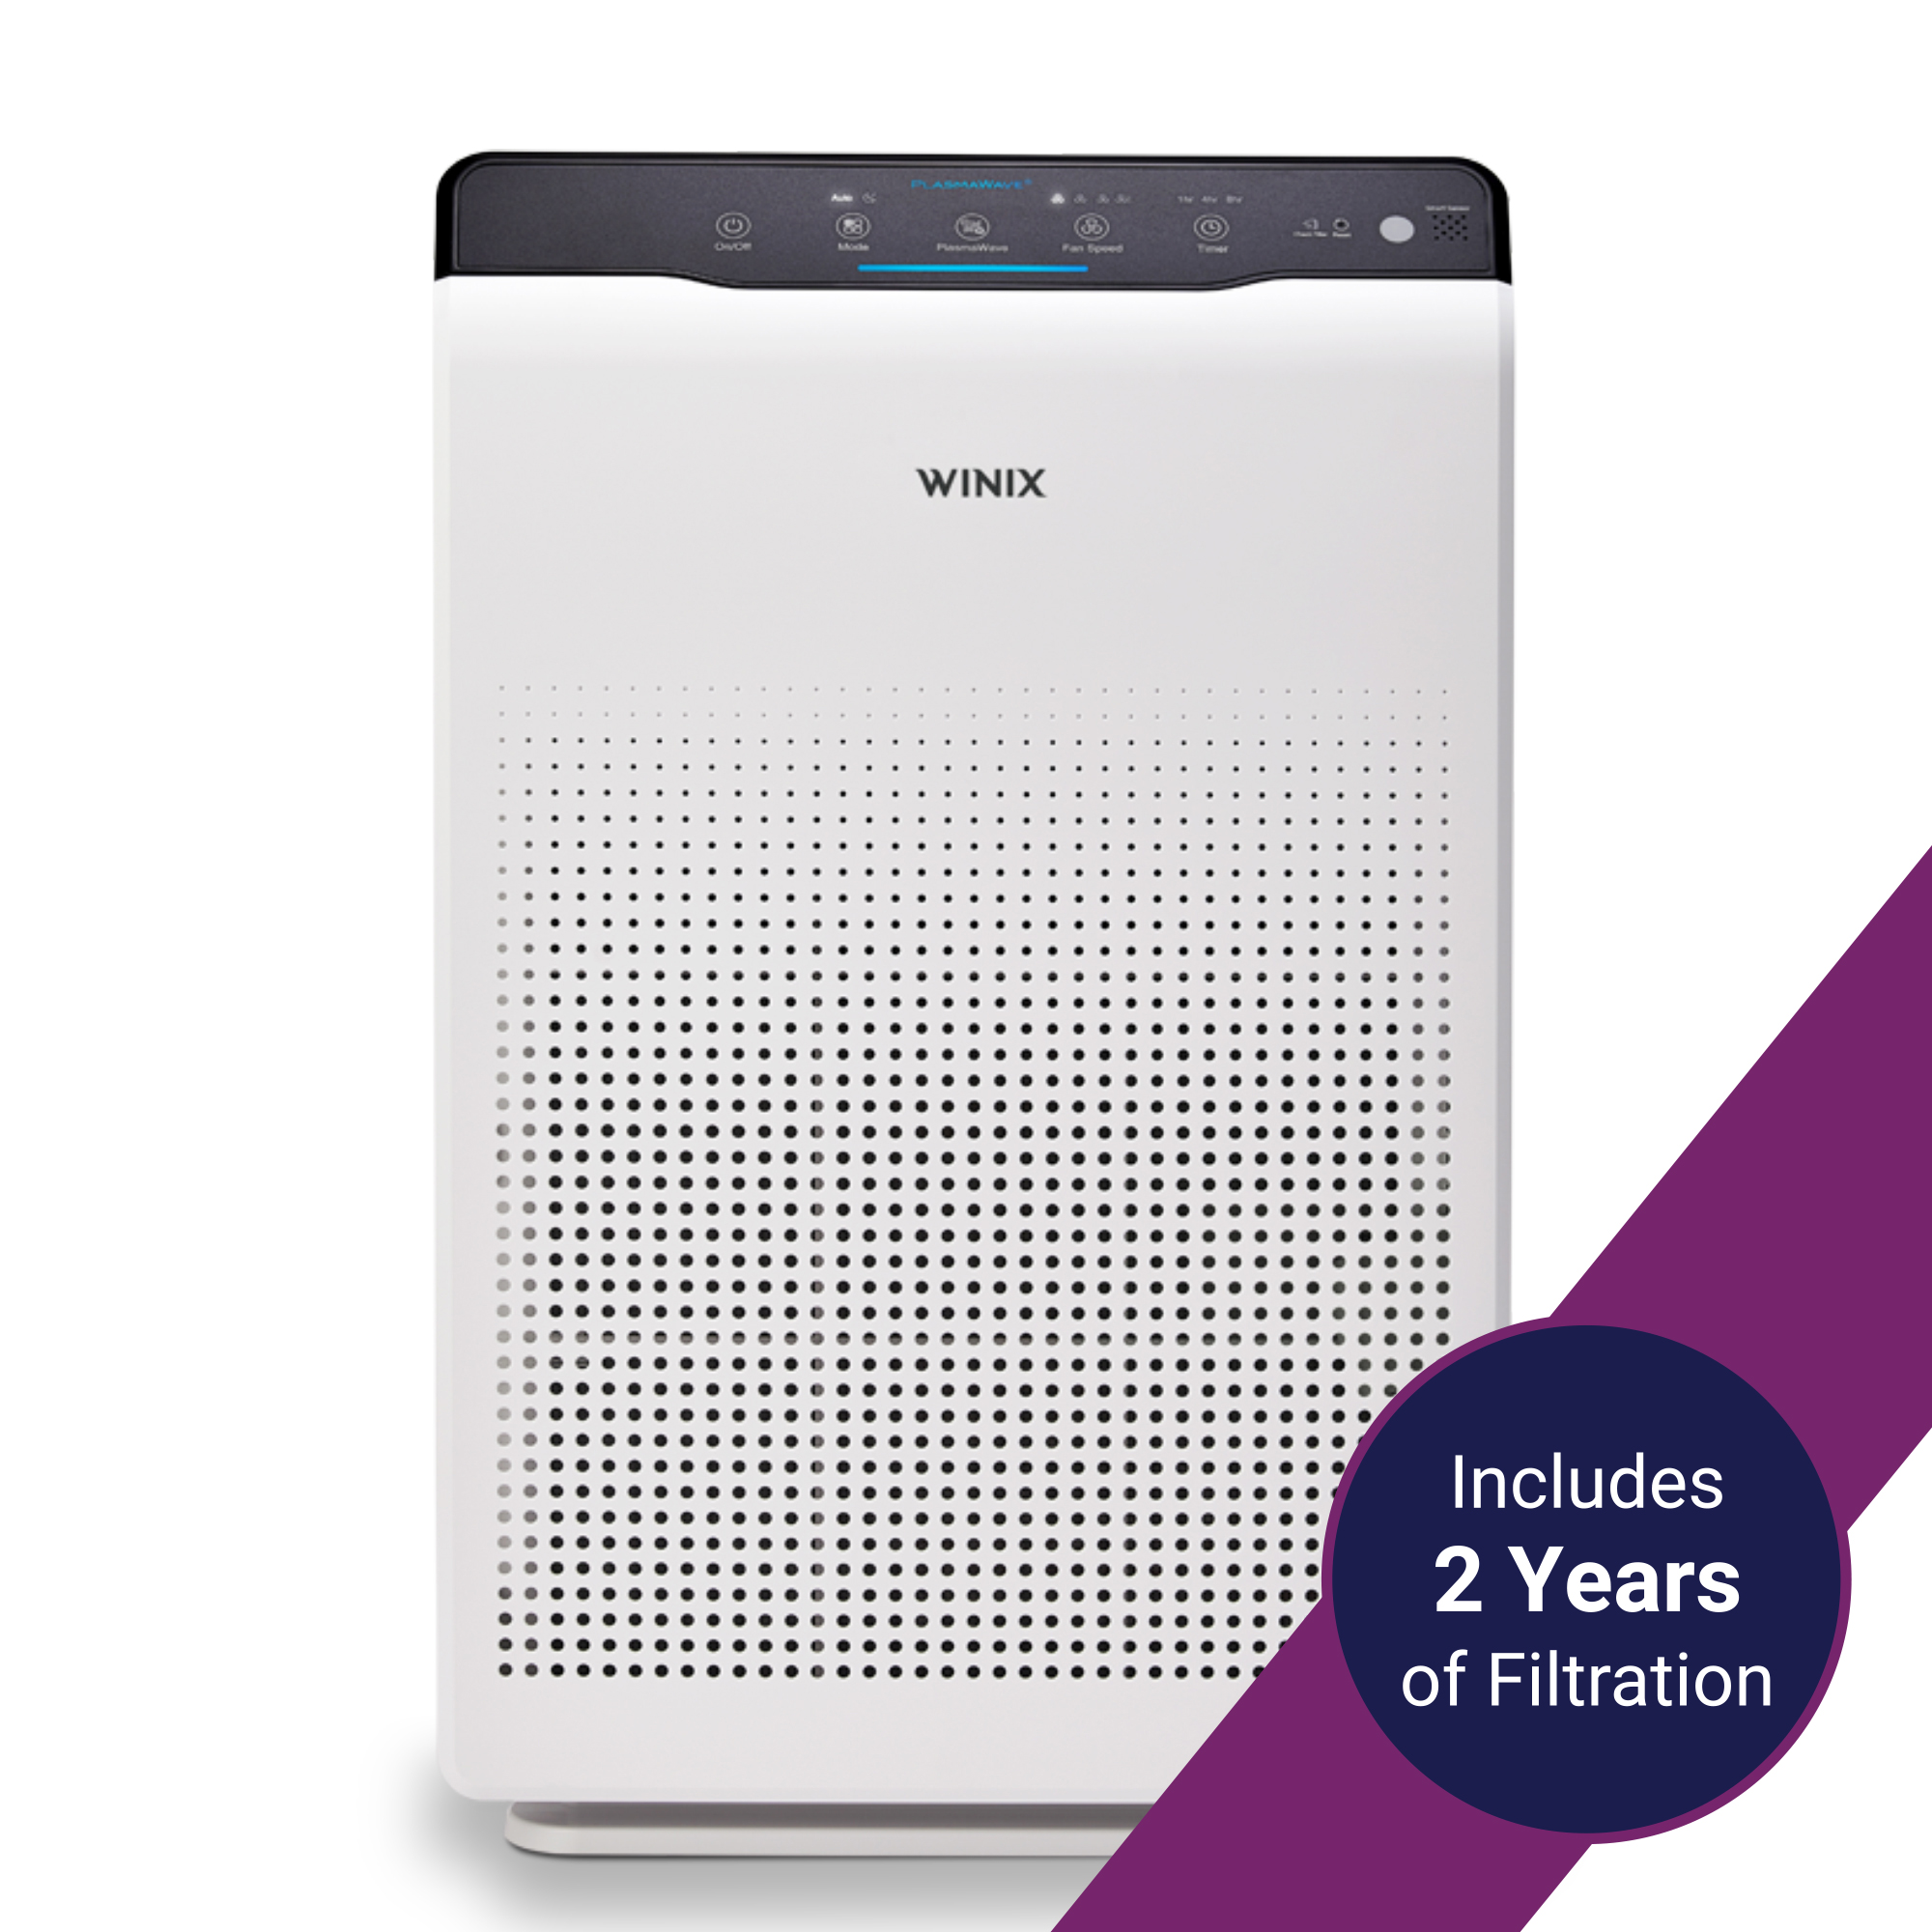 Winix C535 True HEPA 4-Stage Air Purifier for allergens and VOCs with 2 Years of Filters and PlasmaWave Technology AHAM Verified for 360 sq ft and Max Room Capacity 1728 sq ft. - image 1 of 9